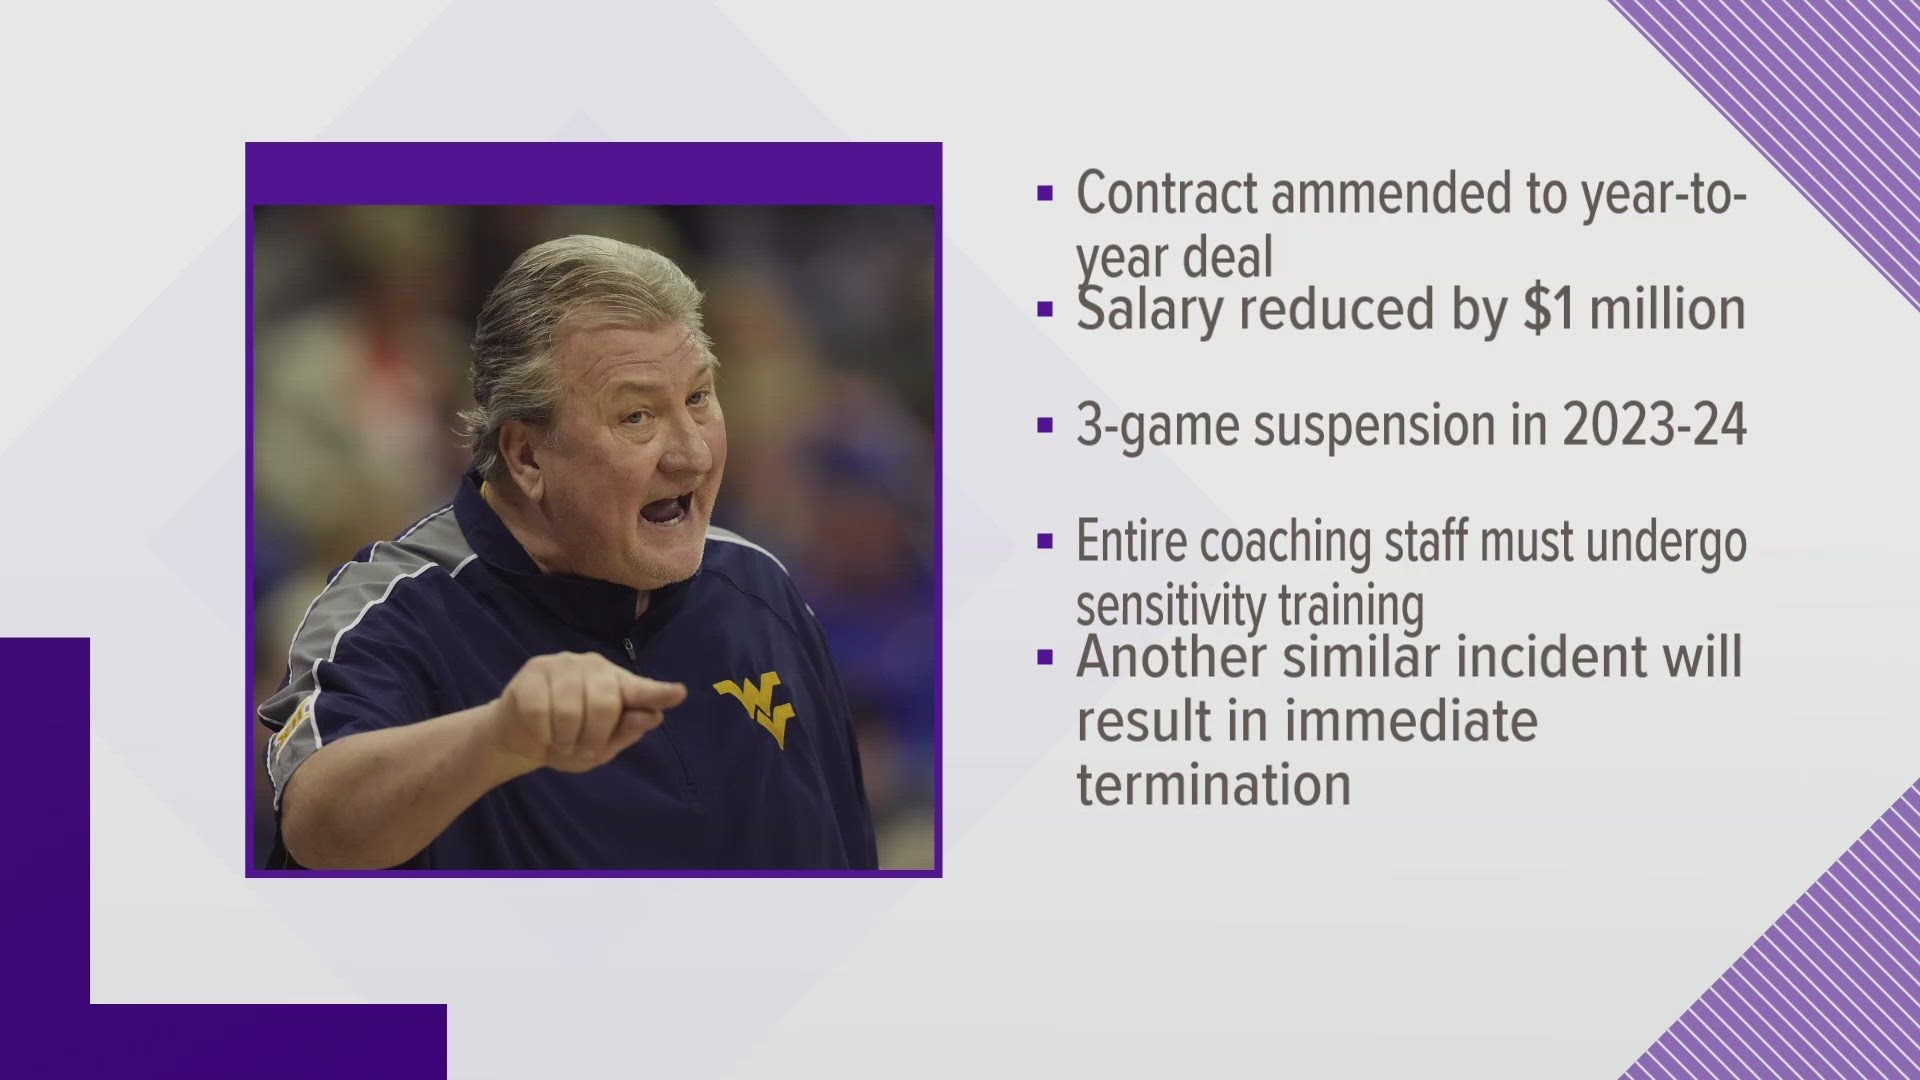 The announcement comes two days after Huggins used a homophobic slur on a live radio appearance.